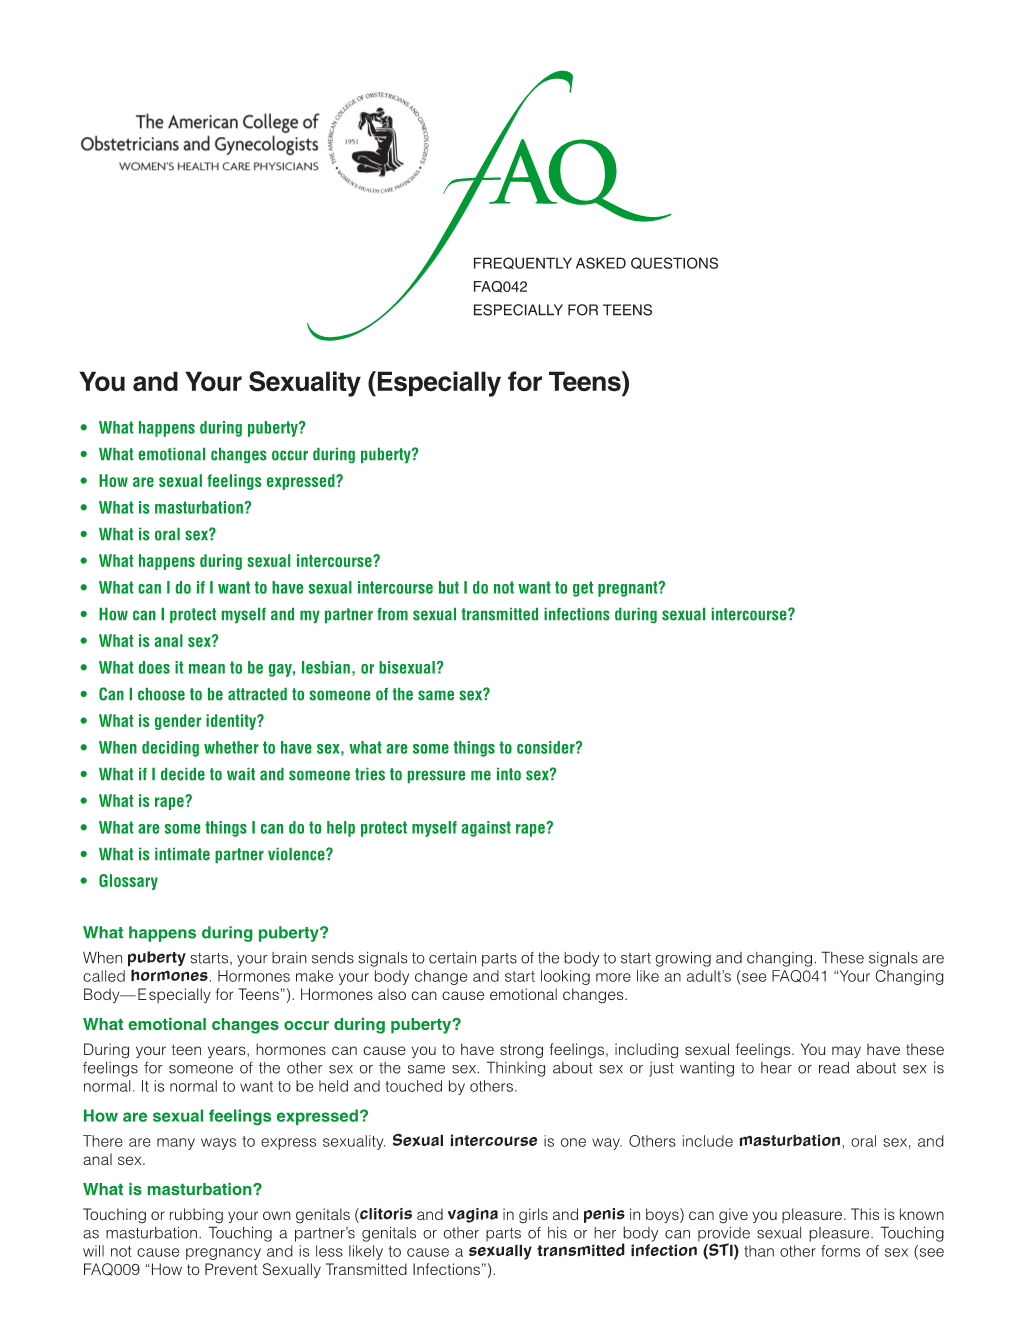 FAQ042 -- You and Your Sexuality (Especially for Teens)